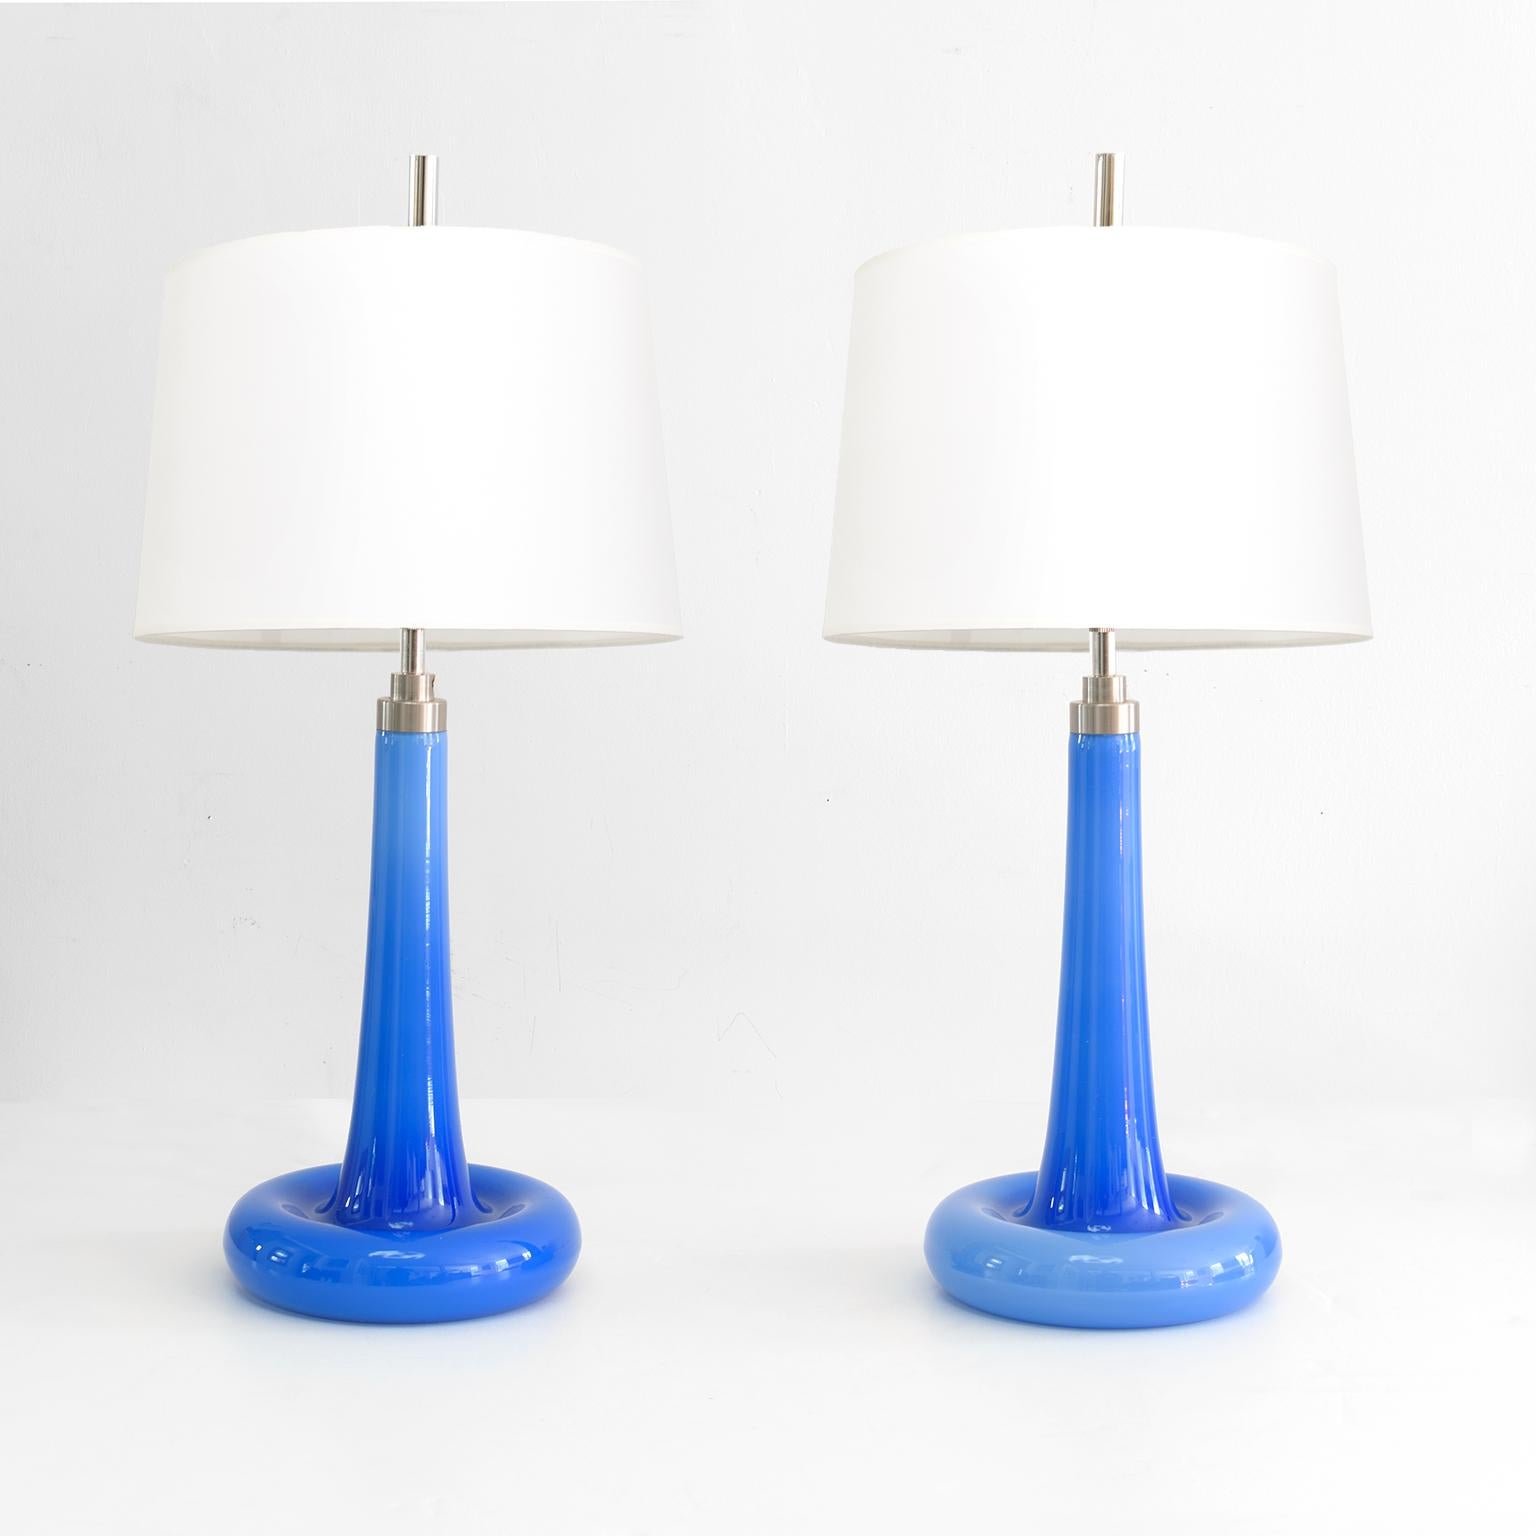 Pair of Michael Bang designed blue glass table lamps with an annular shaped bases and soft cone shaped bodies. The glass is capped with brushed metal hardware and a single 3-way standard base socket and matching harp. Newly rewired for use in the